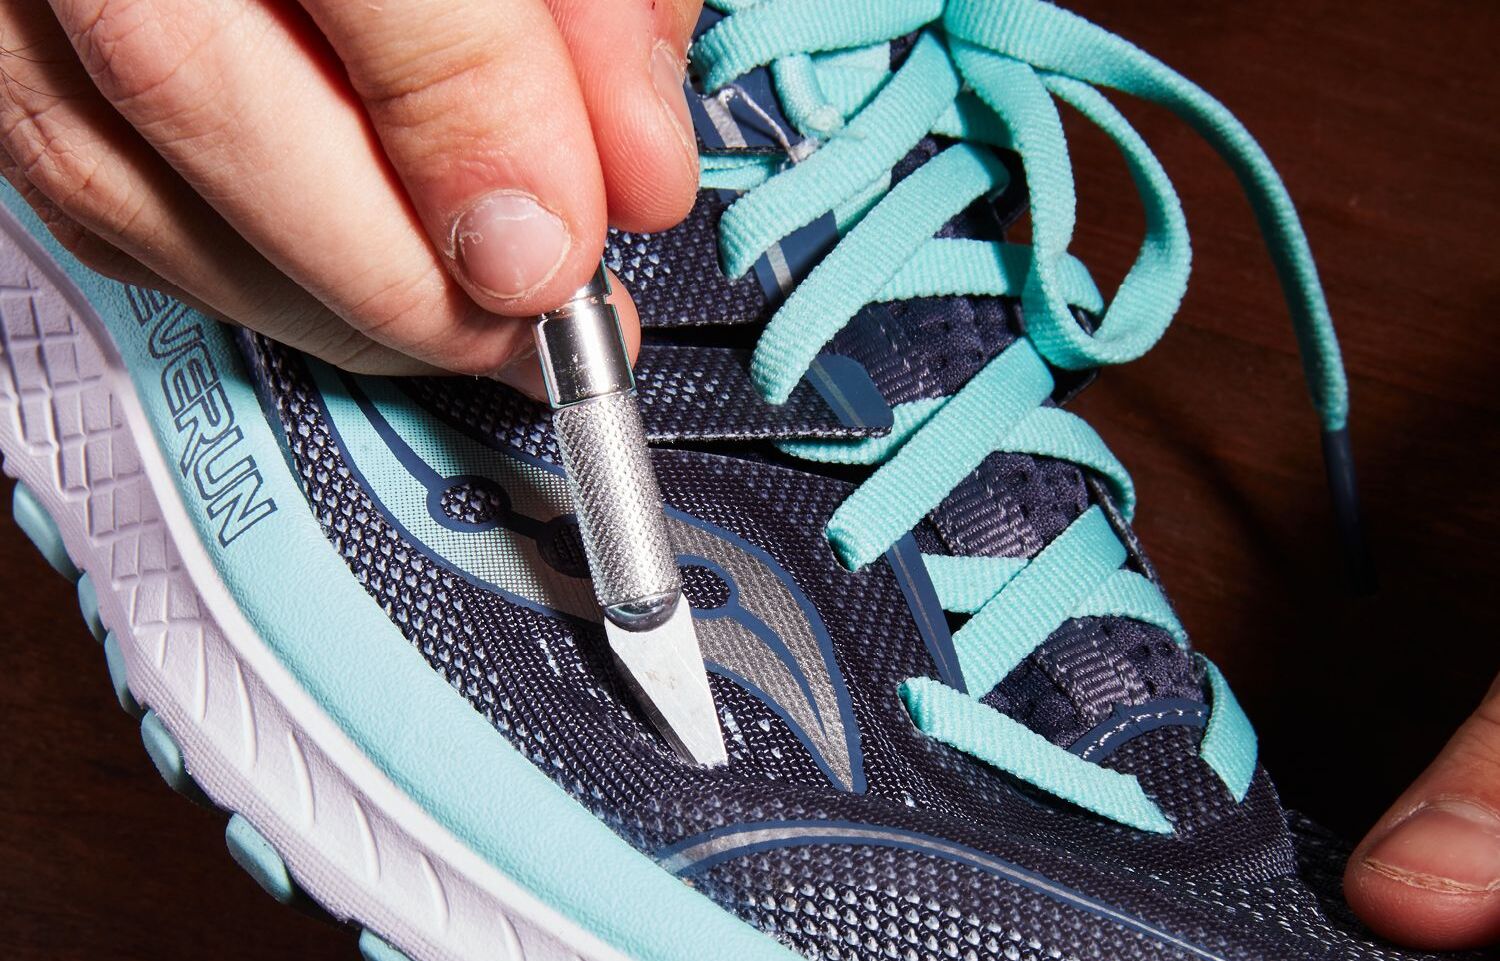 How To Repair Running Shoes